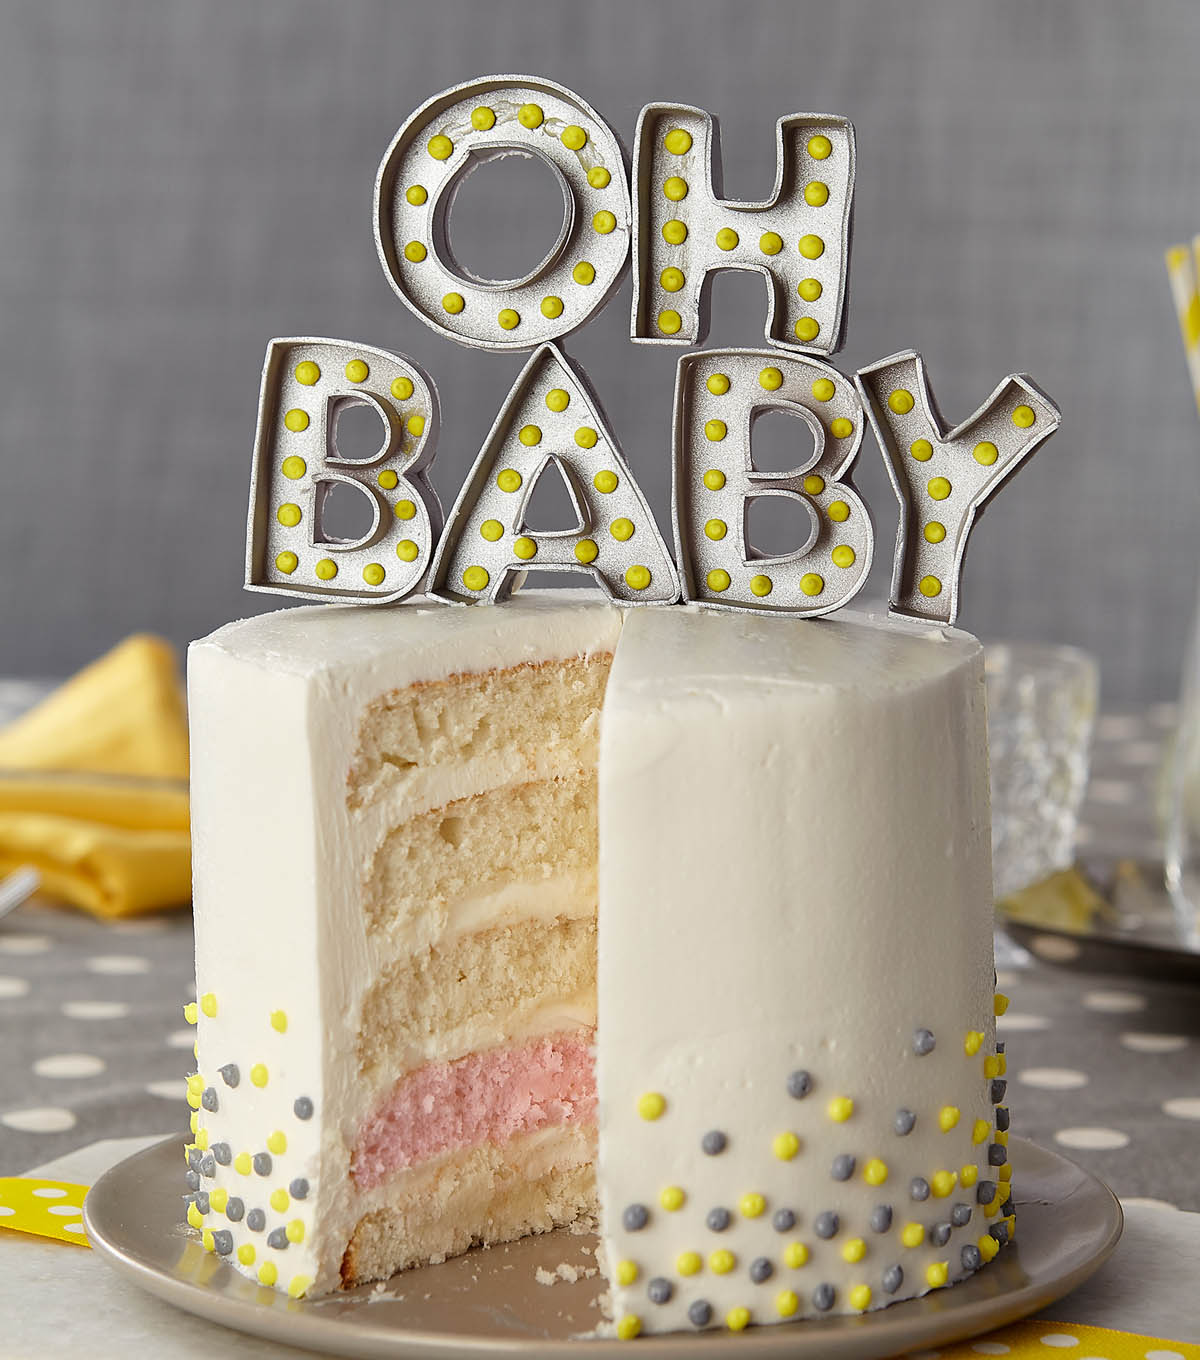 Pin on Gender reveal cakes